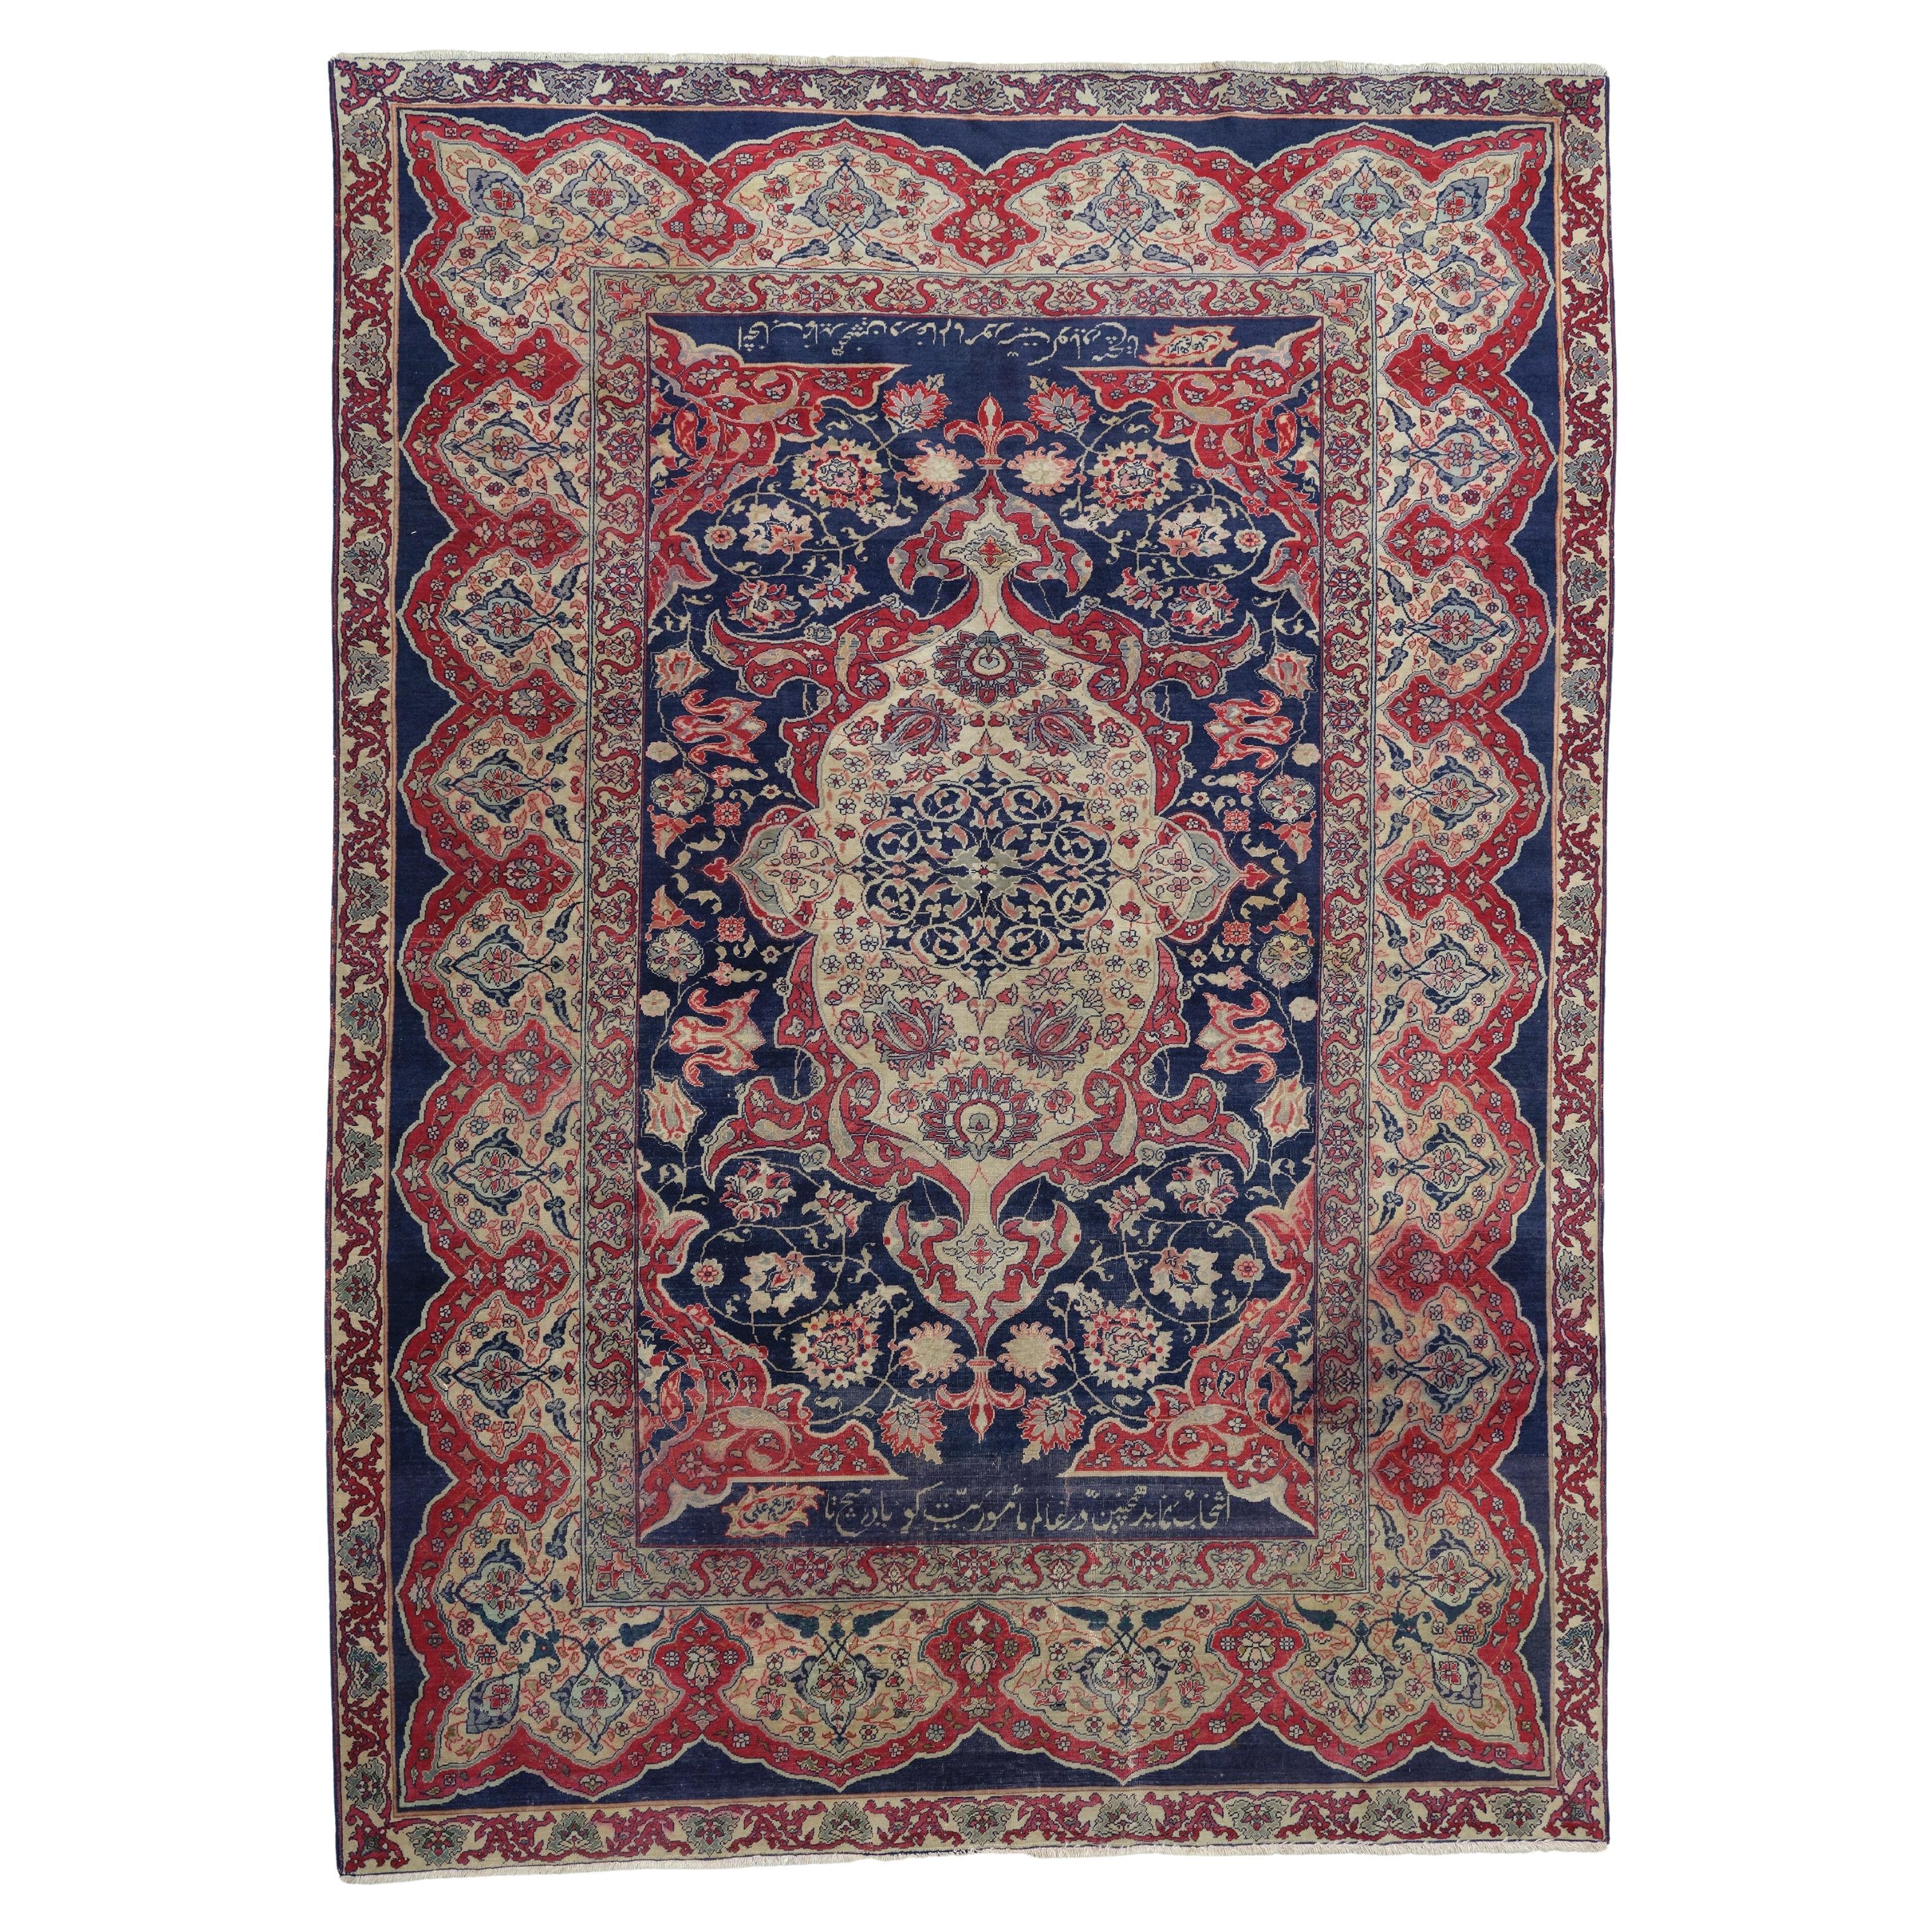 Antique Signed Feshane Rug - Late 19th Century Ottoman Period Signed Feshane Rug For Sale